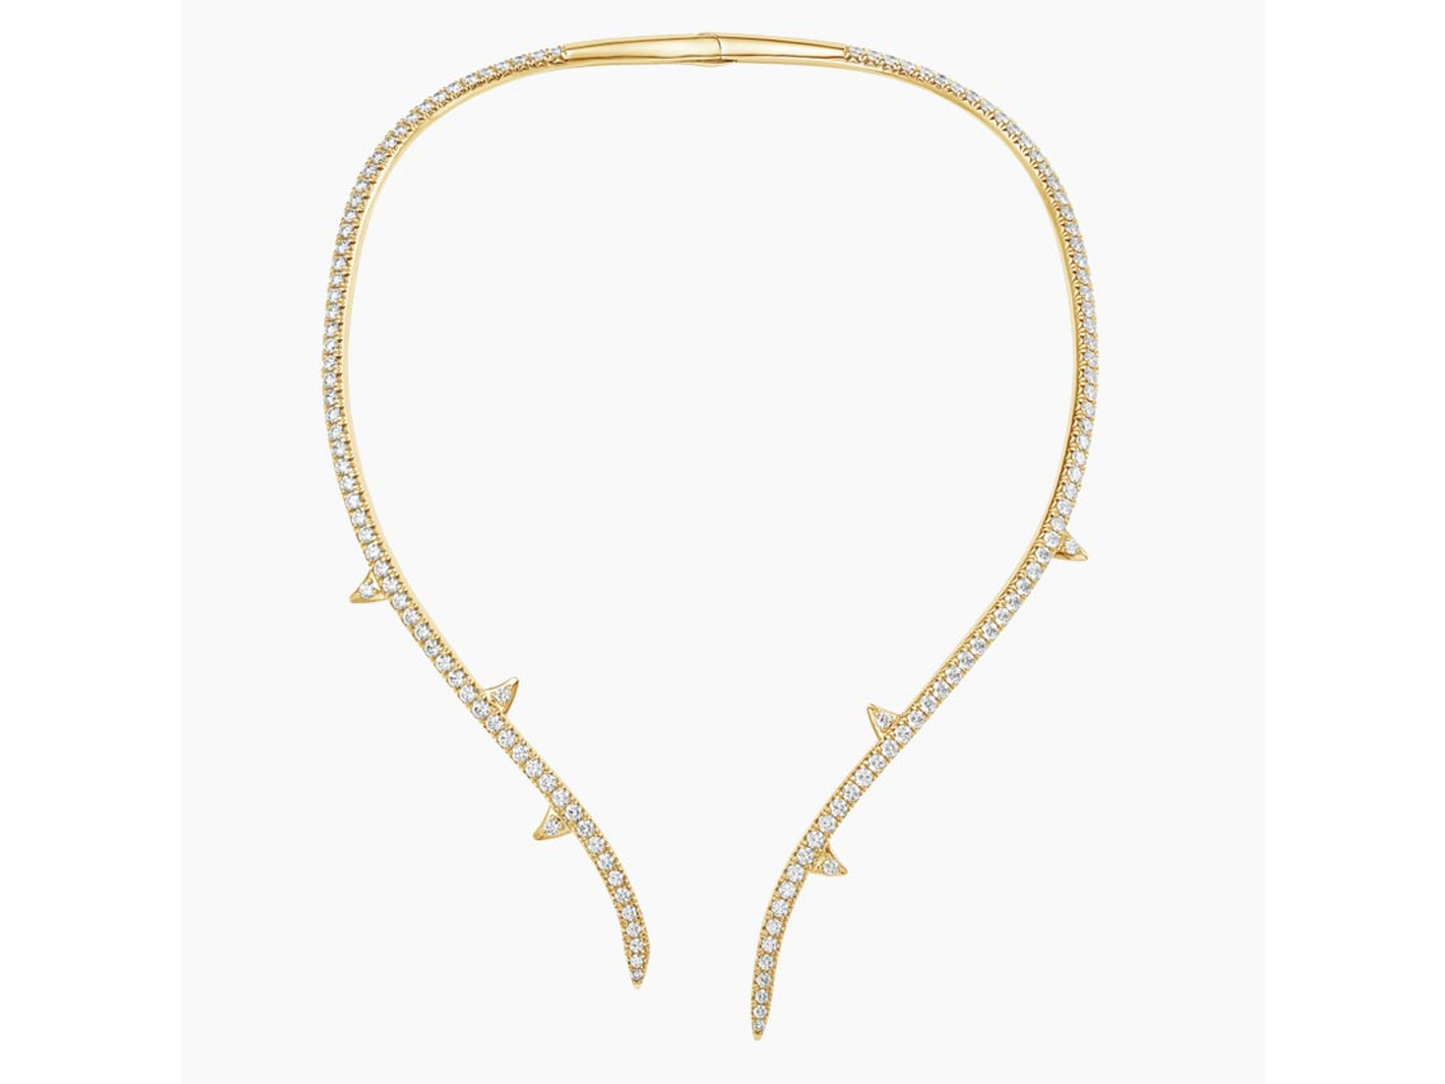 Enchanted Thorn Lab Diamond Collar Necklace 8 2/3 ctw in 14K Yellow Gold